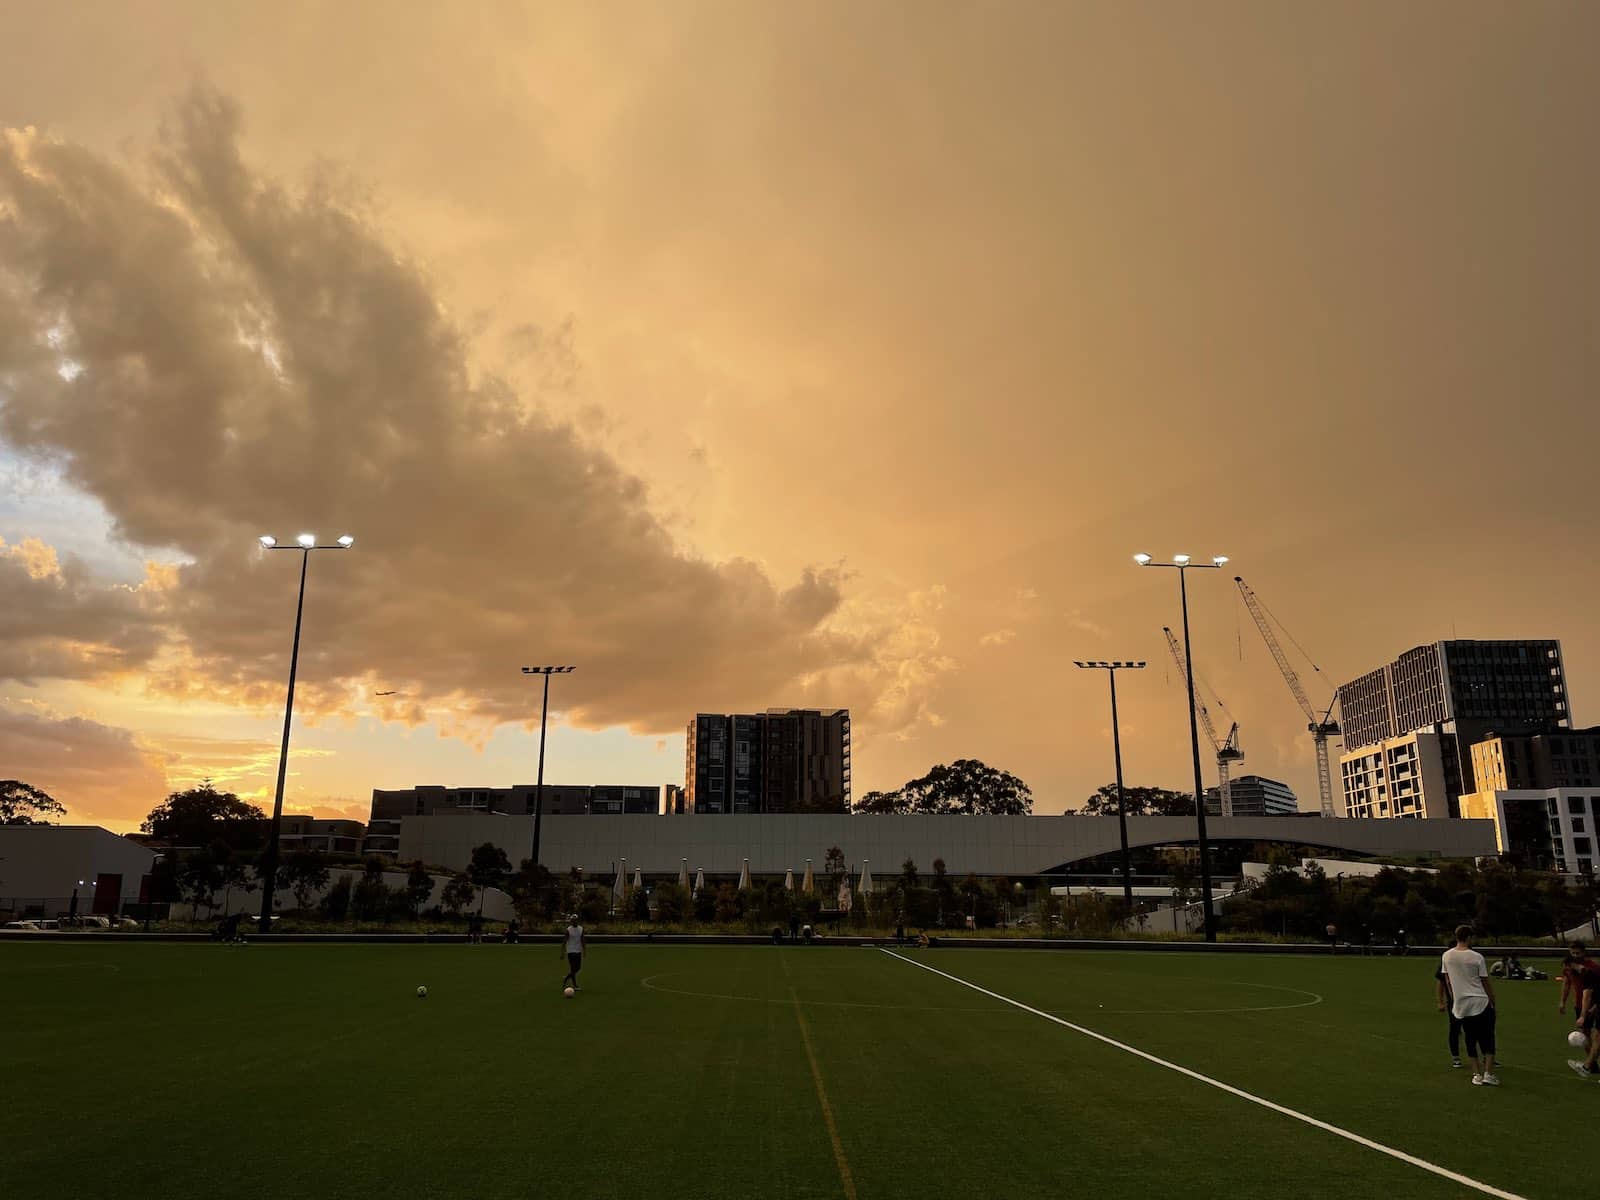 A soccer field at dusk showing a yellow sky with lots of clouds. There are some modern apartment buildings behind the soccer field and some construction cranes in the background.